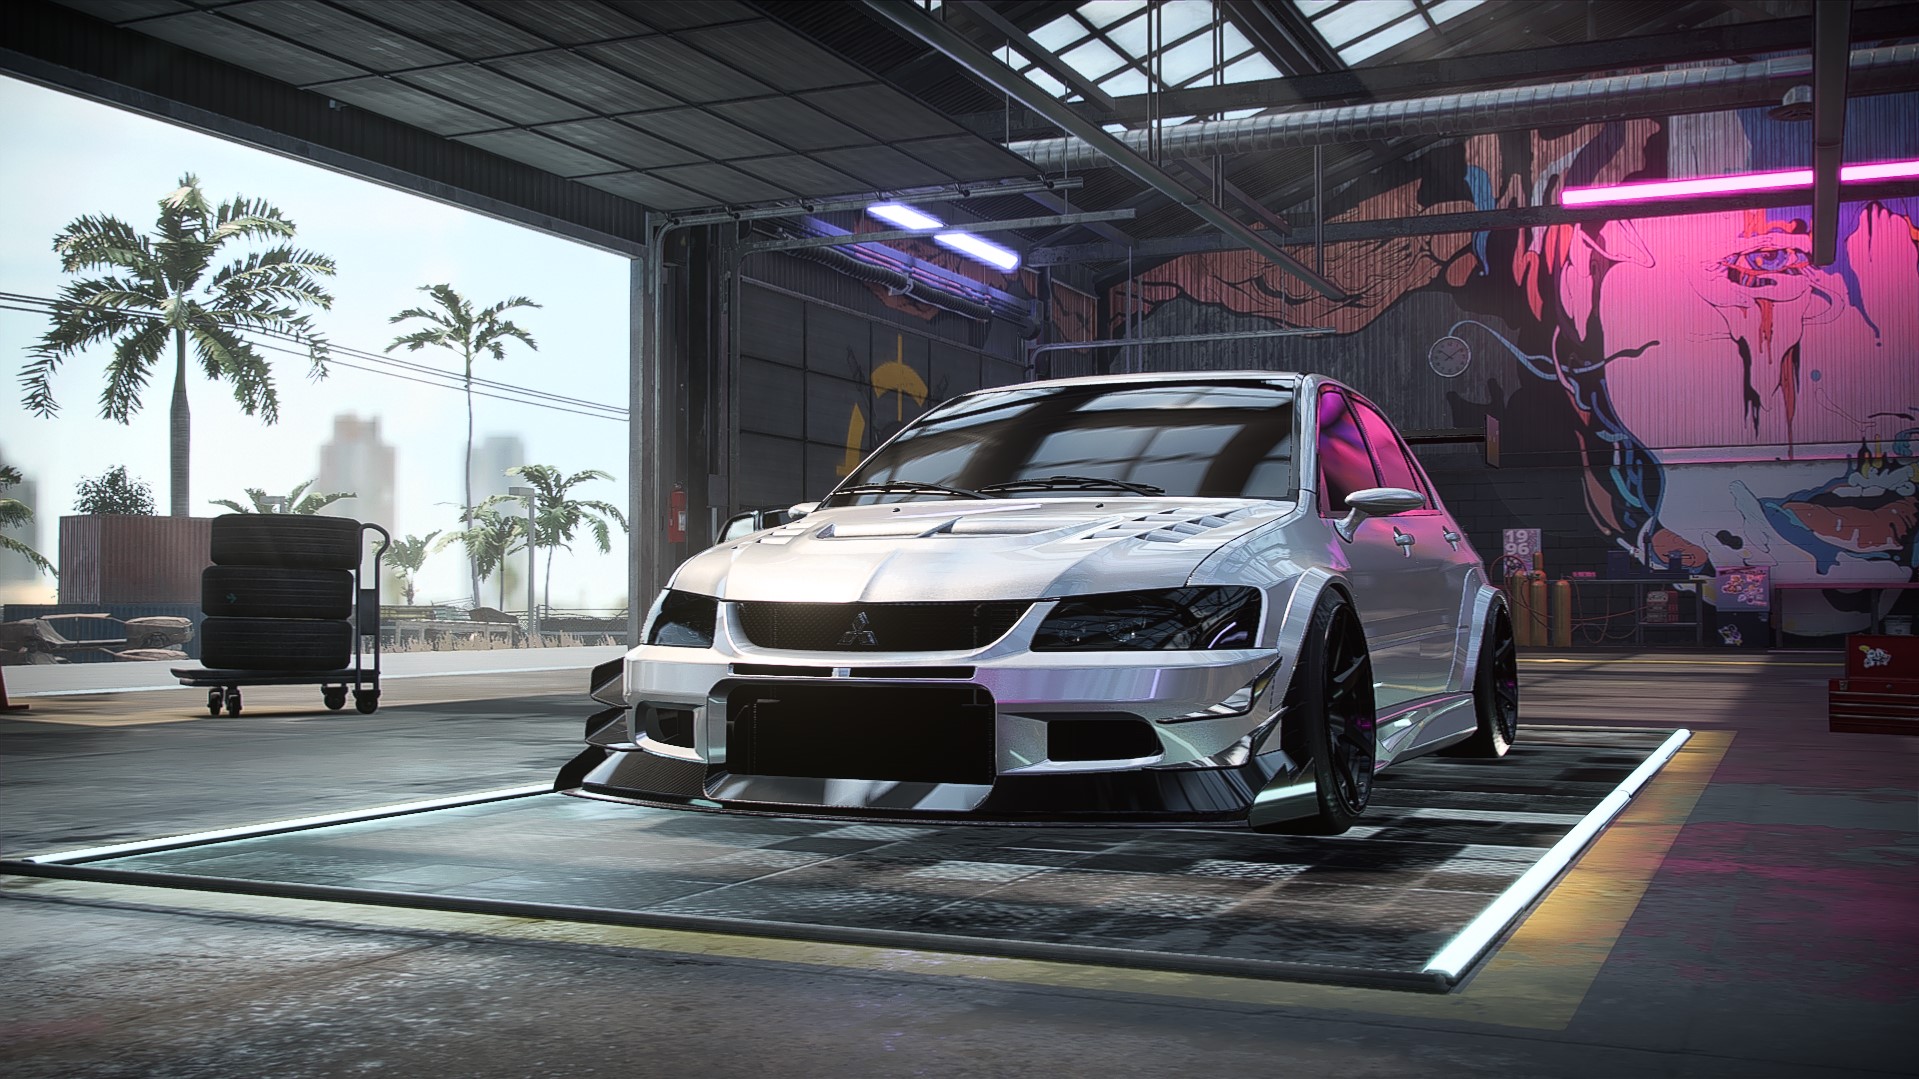 General 1919x1079 Mitsubishi Lancer Mitsubishi Lancer EVO Need for Speed: Heat Need for Speed Japanese cars video games Electronic Arts bodykit Ghost Games